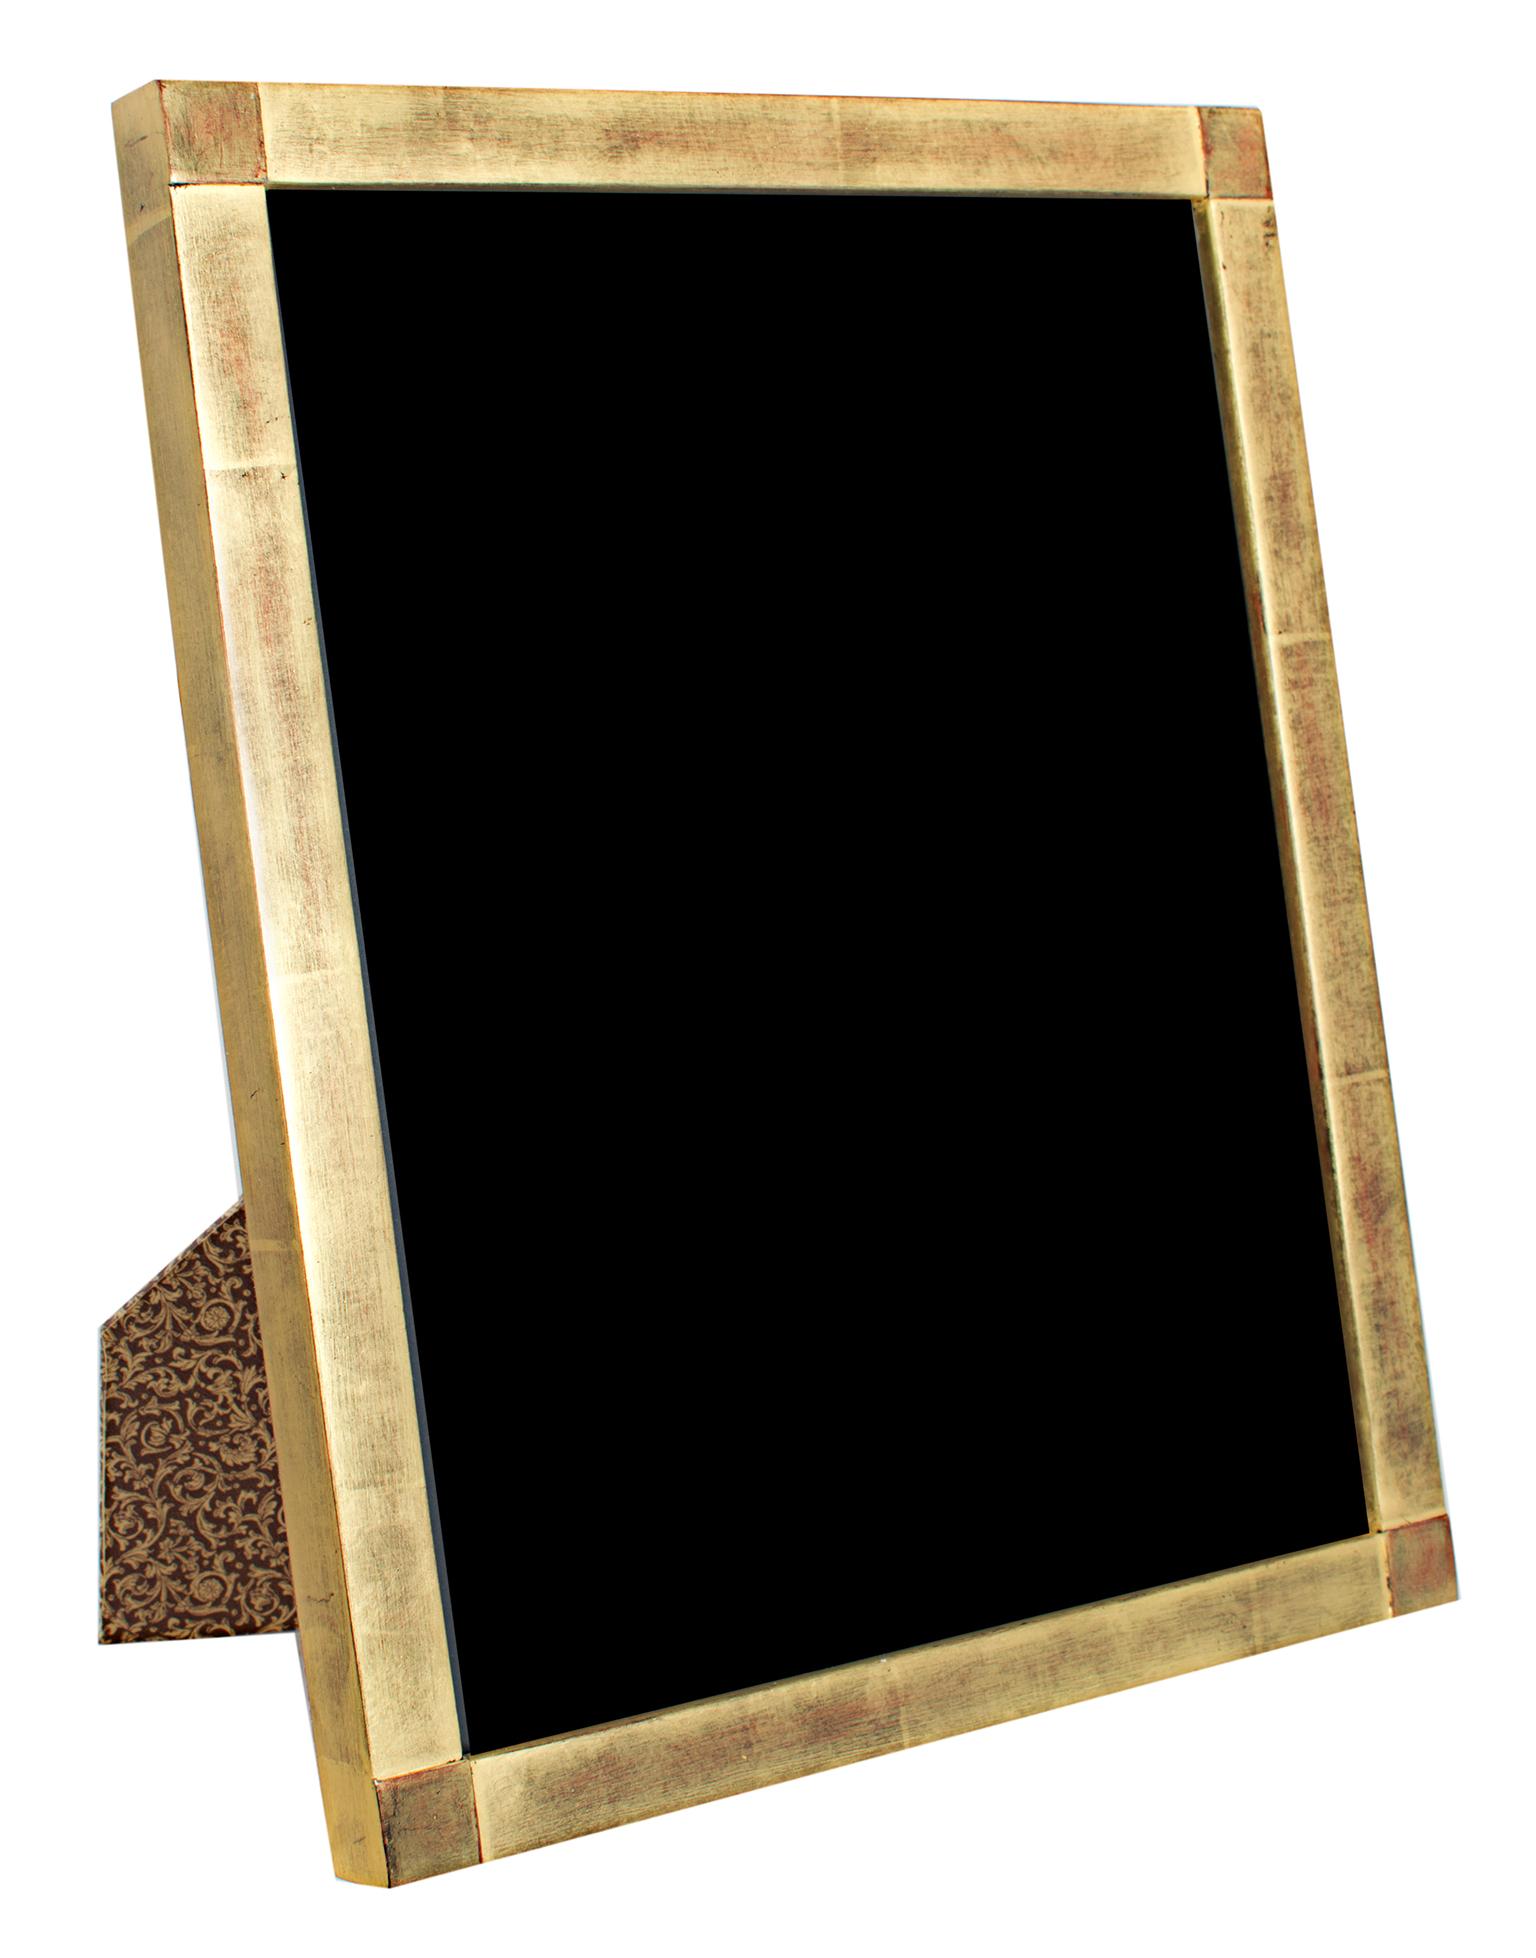 "Romanian Handmade Photo Frame, " 22K Gold Leaf & Wood 8 x 10 in Frame - Art by Unknown